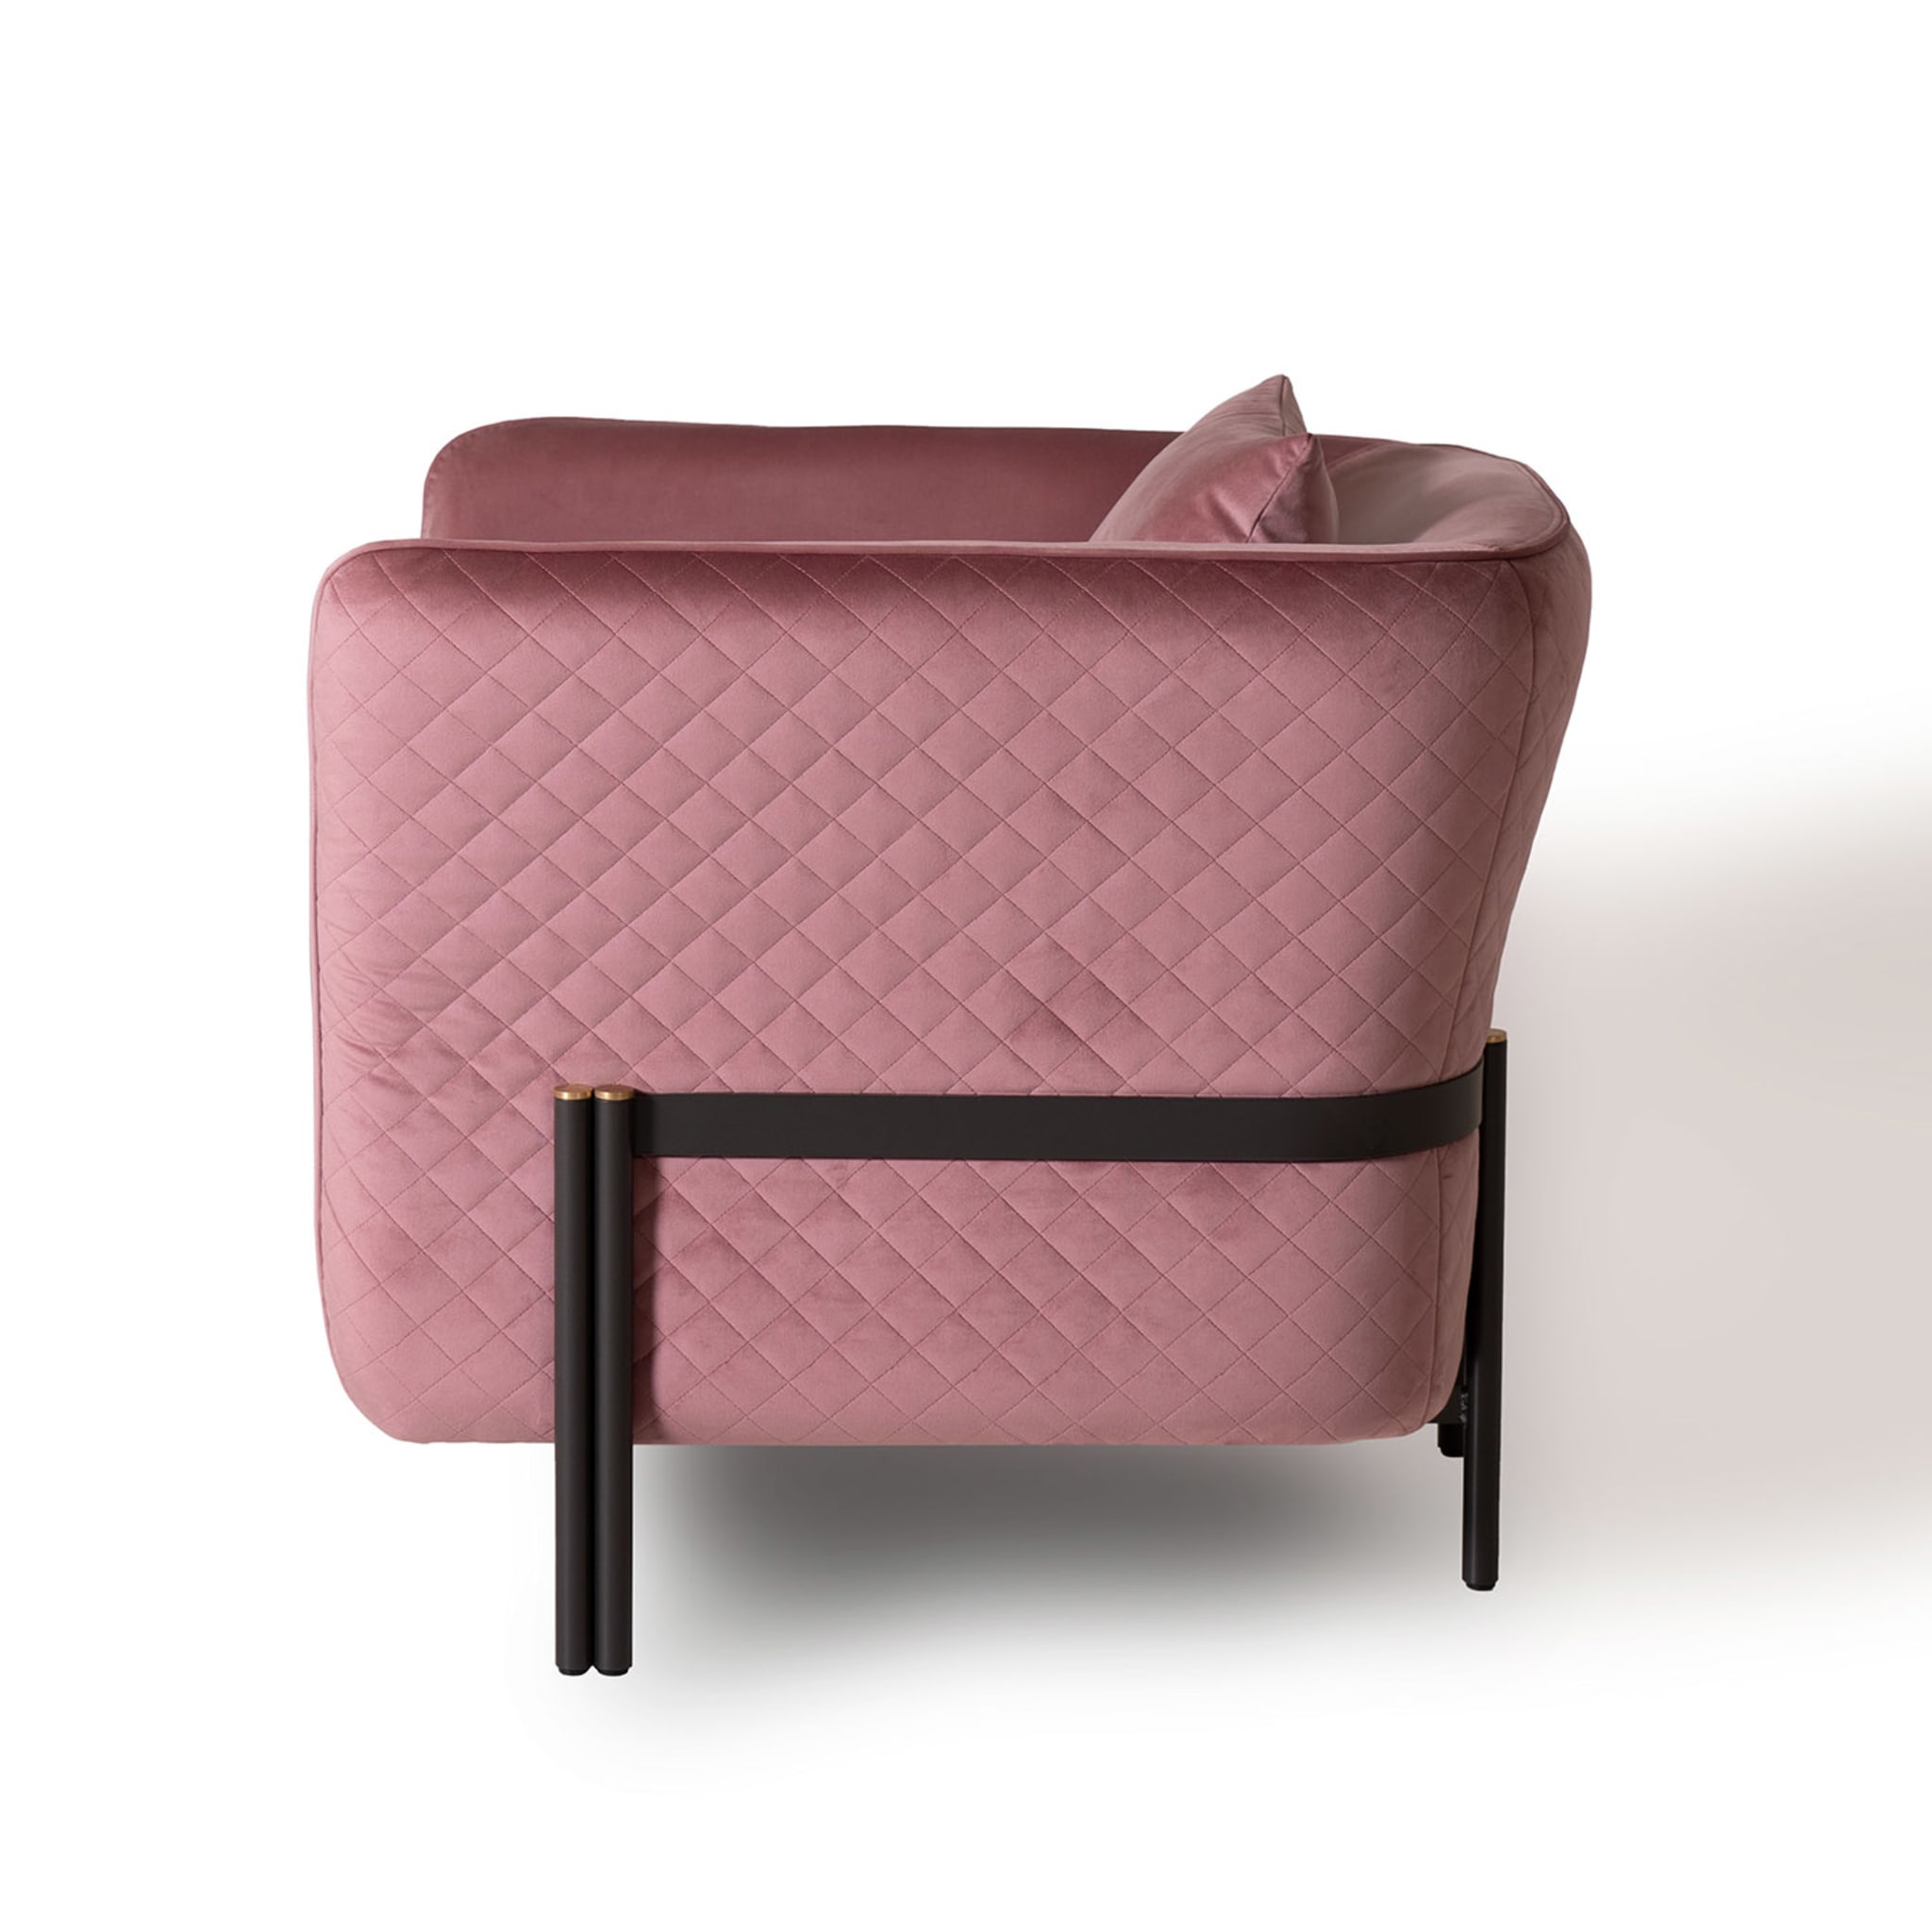 Universal Armchair by Marco and Giulio Mantellassi - Alternative view 2